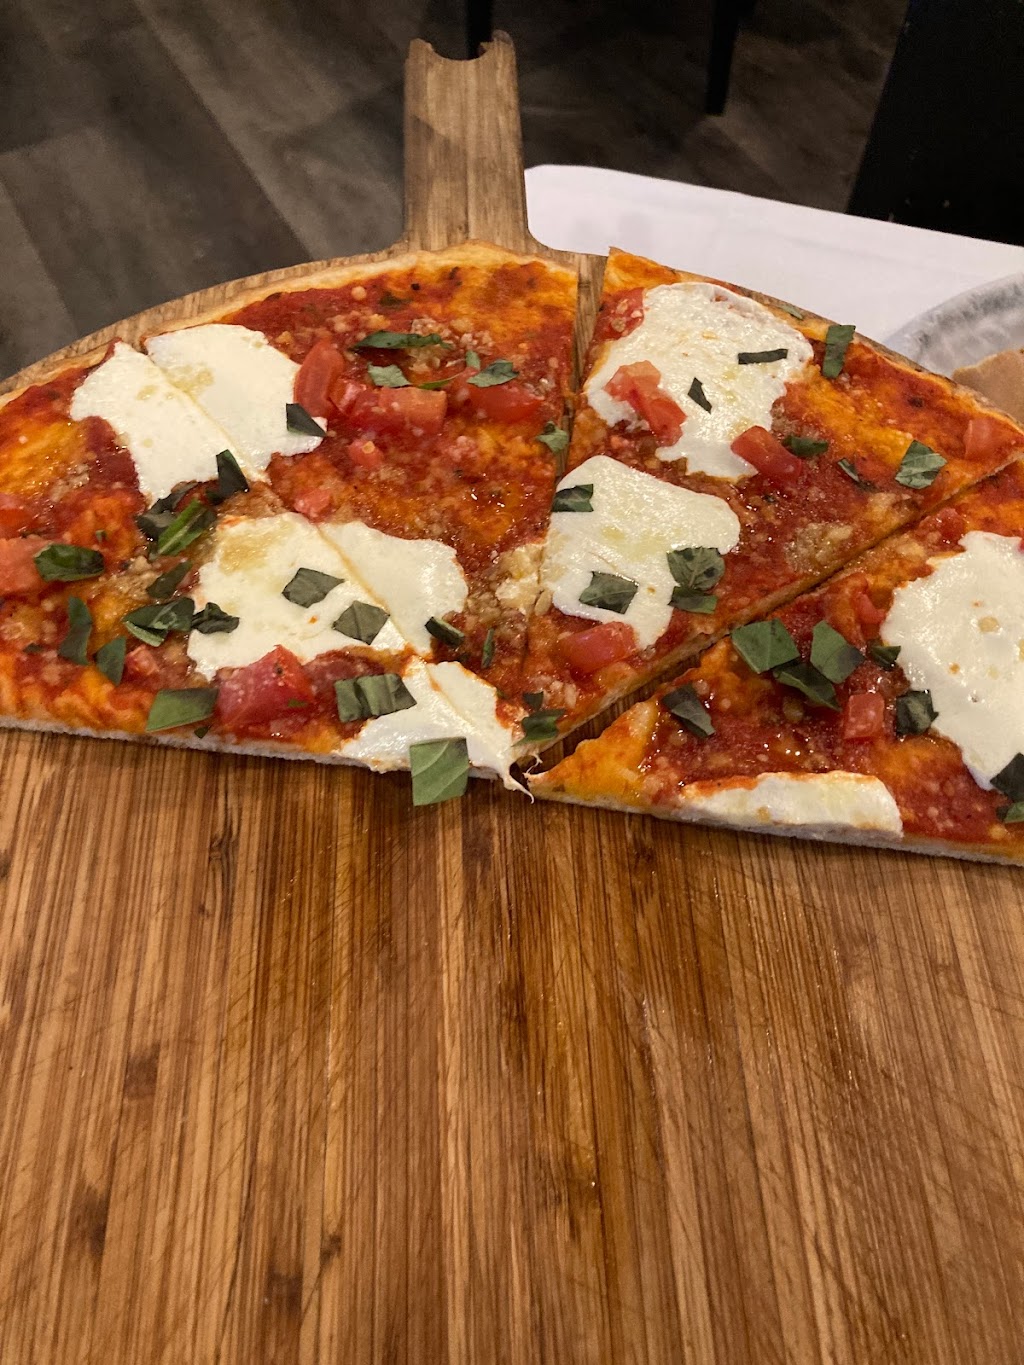 North Street Tavern & Wood Fired Pizza | 1128 North St, White Plains, NY 10605 | Phone: (914) 437-7111